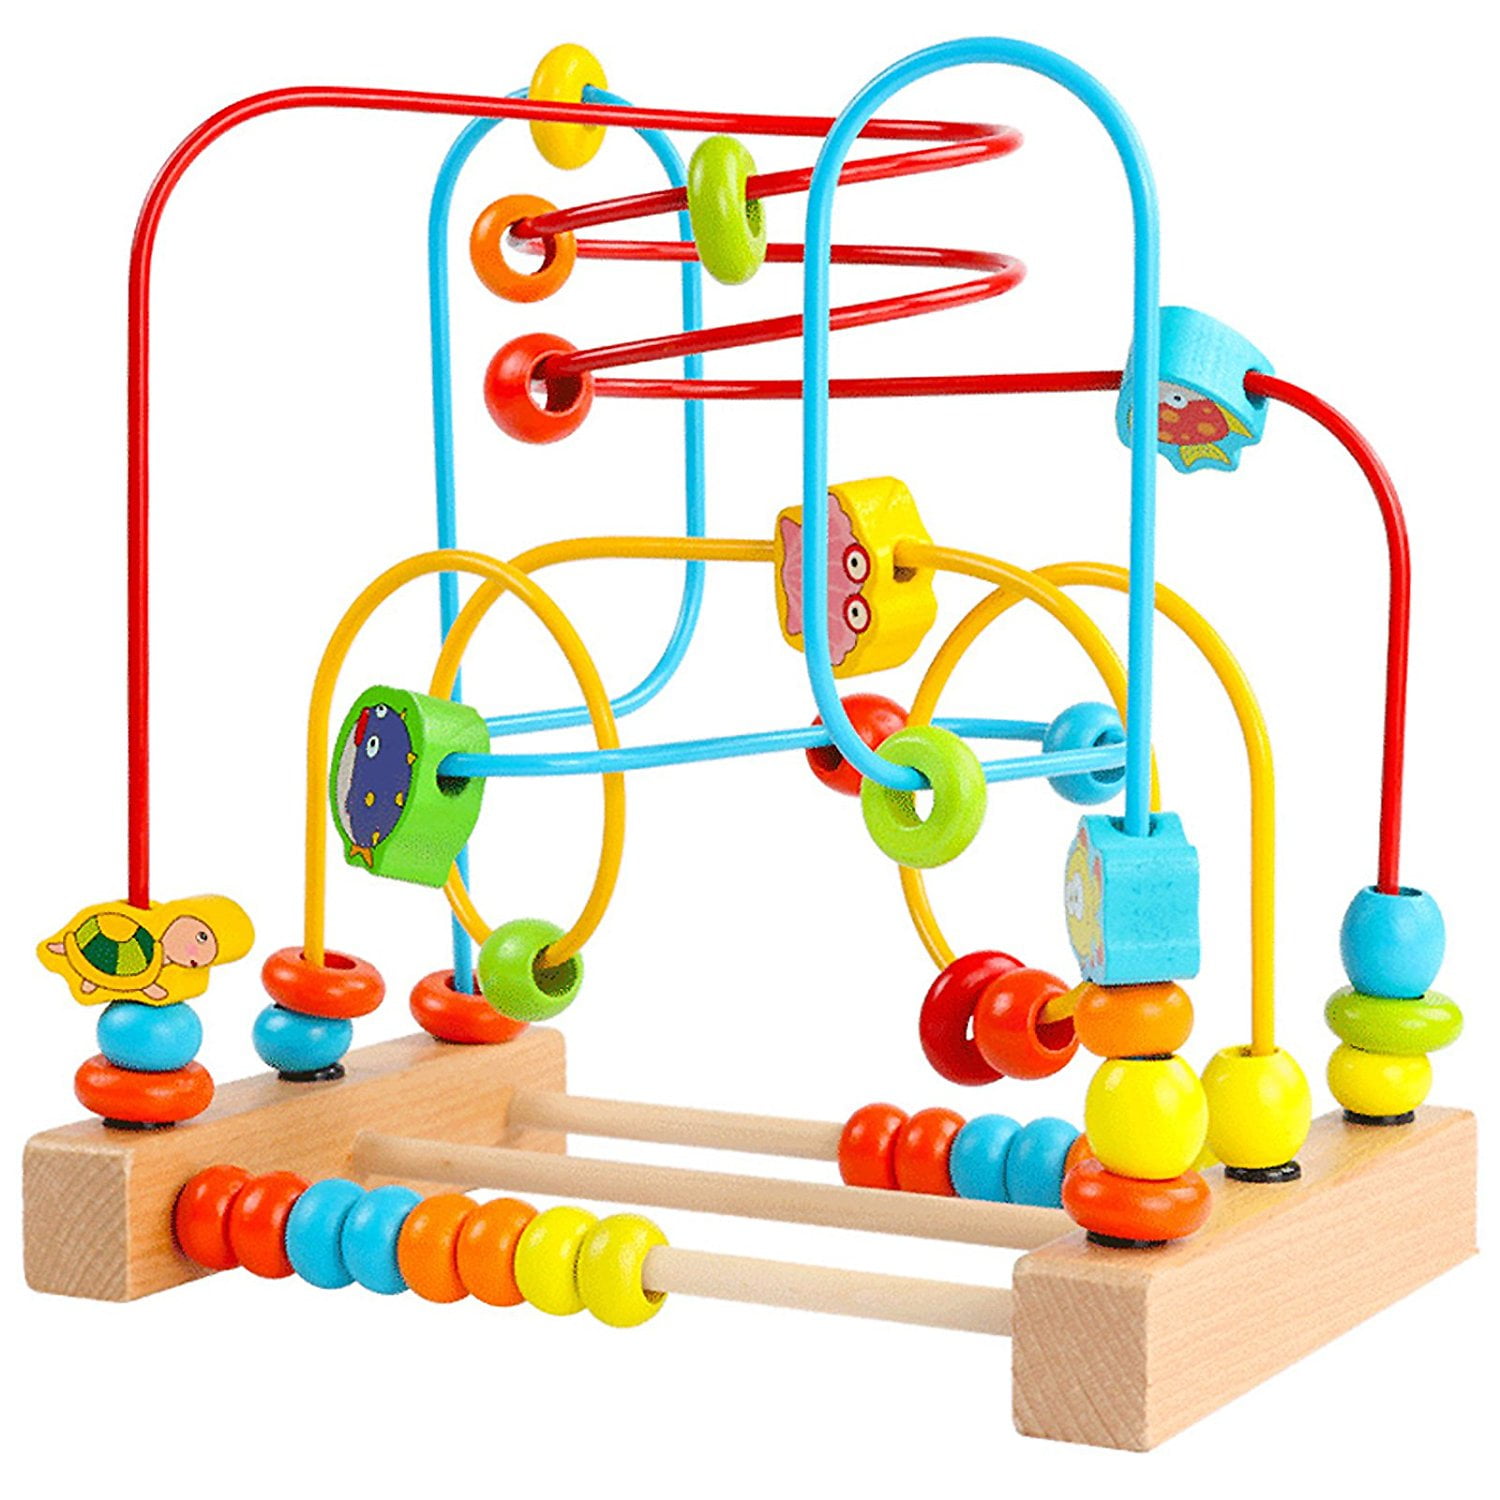 kids Classic Bead Maze Toy for Babies Toddlers Wooden Roller Coaster Beads 